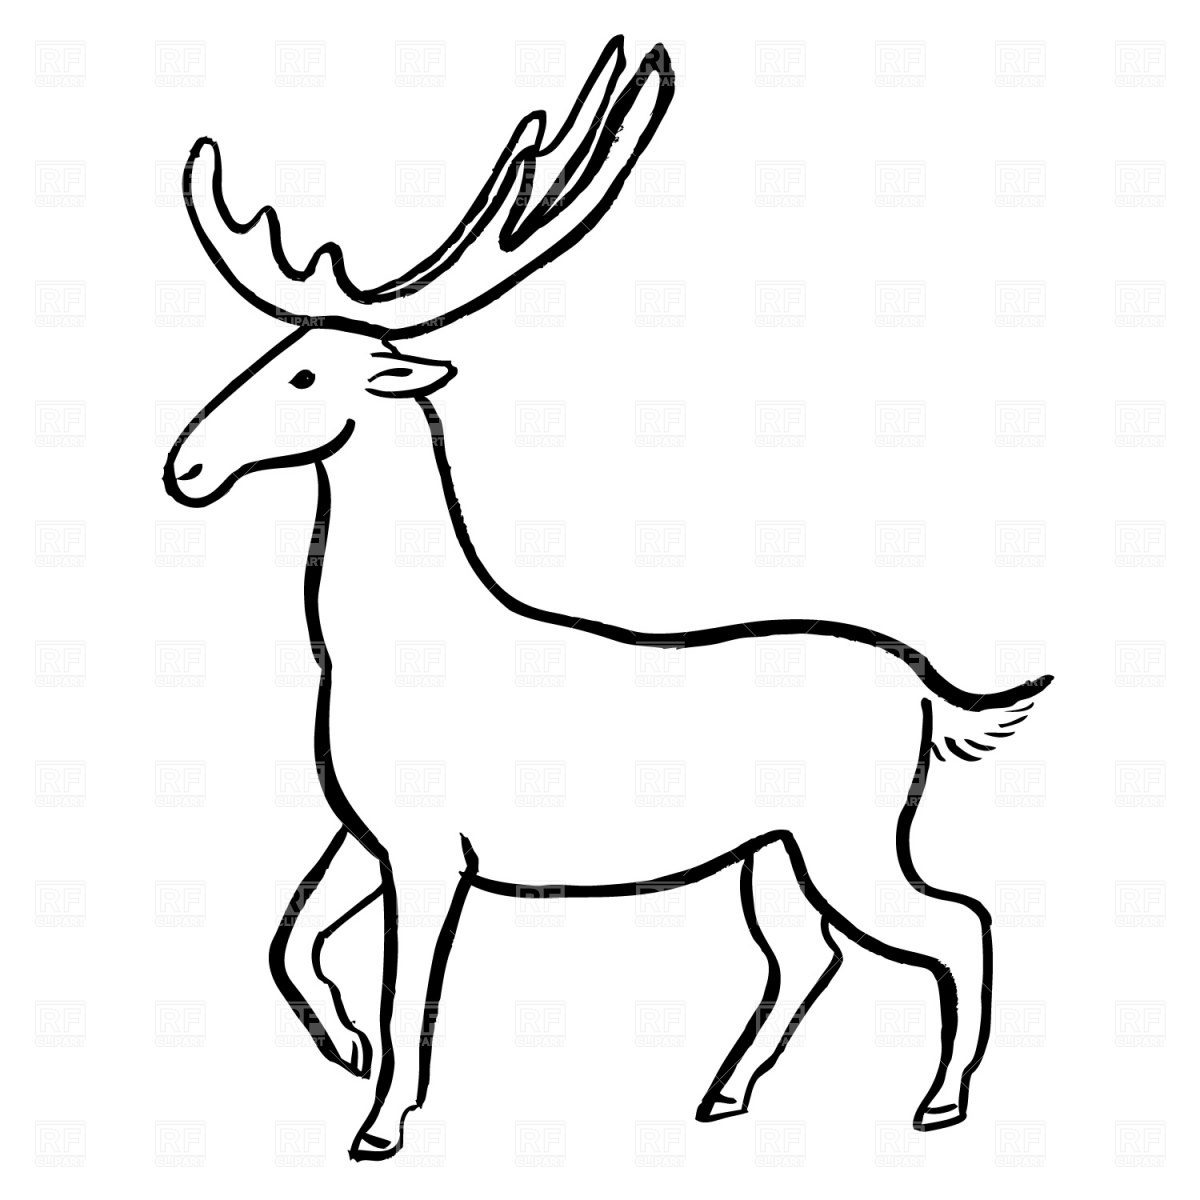 Image of moose clipart 9 moose clip art images free for